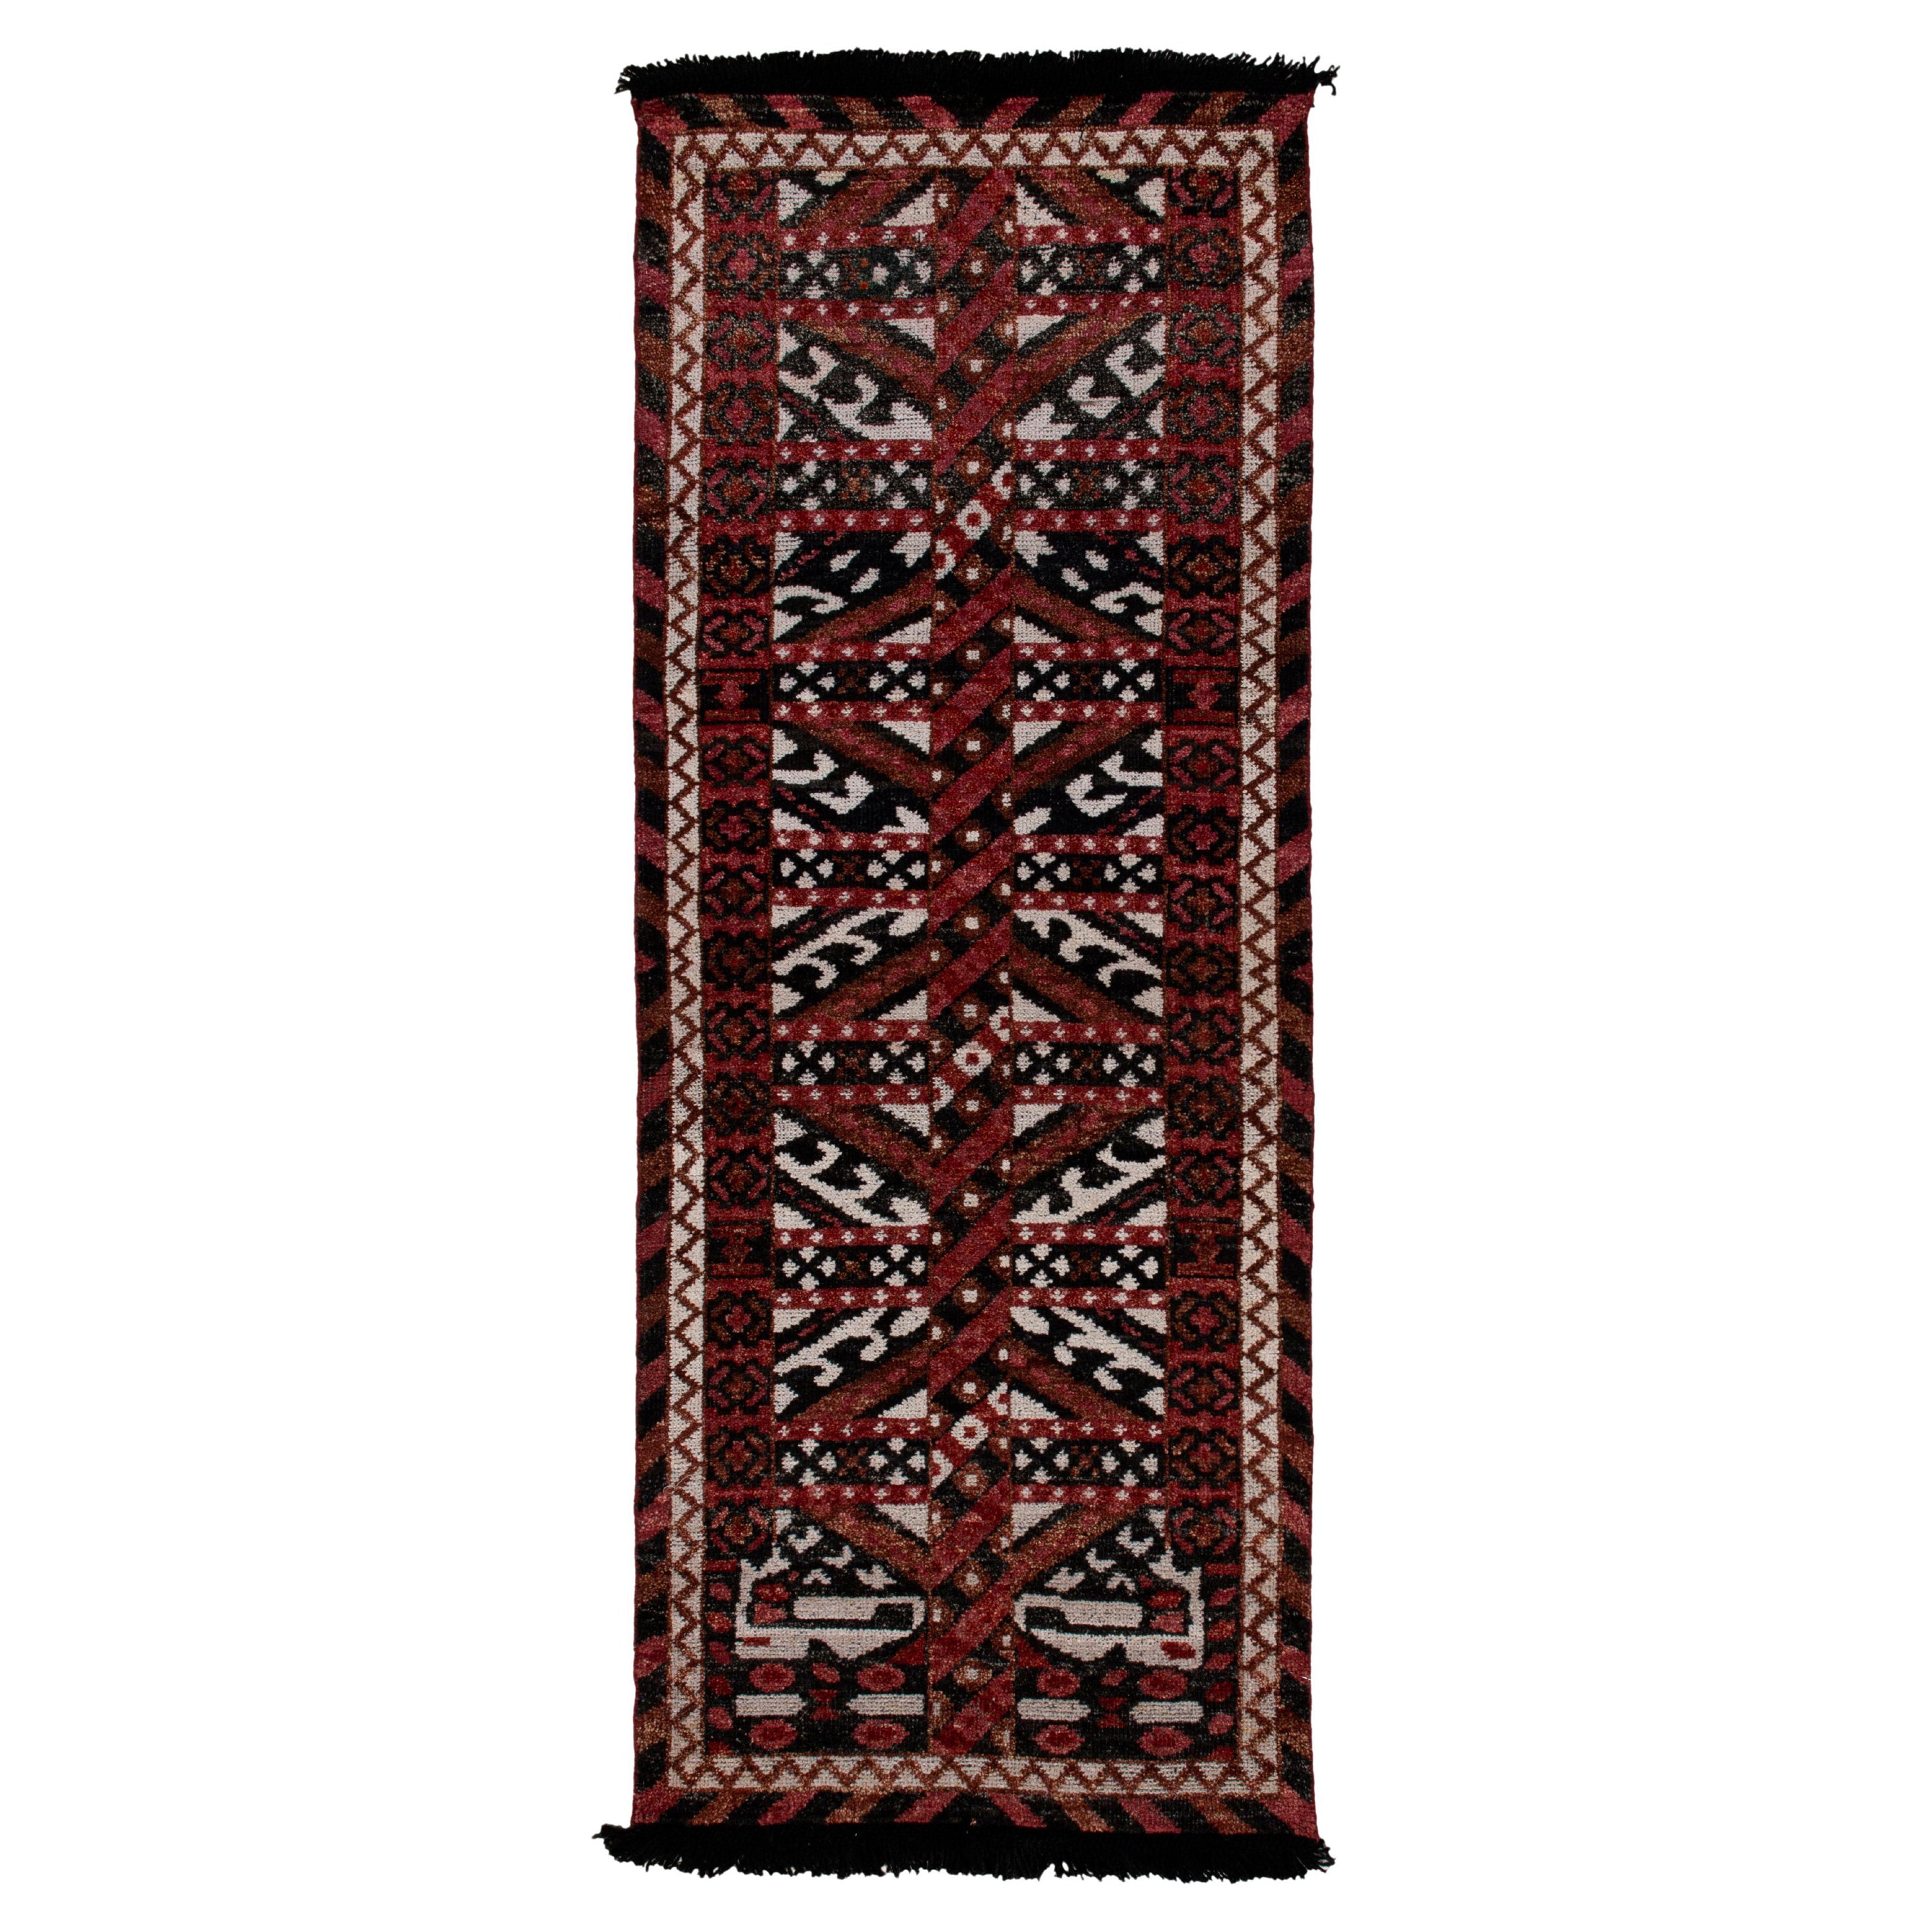 Rug & Kilim's Tribal Style Runner in Red, Black and White Geometric Pattern For Sale